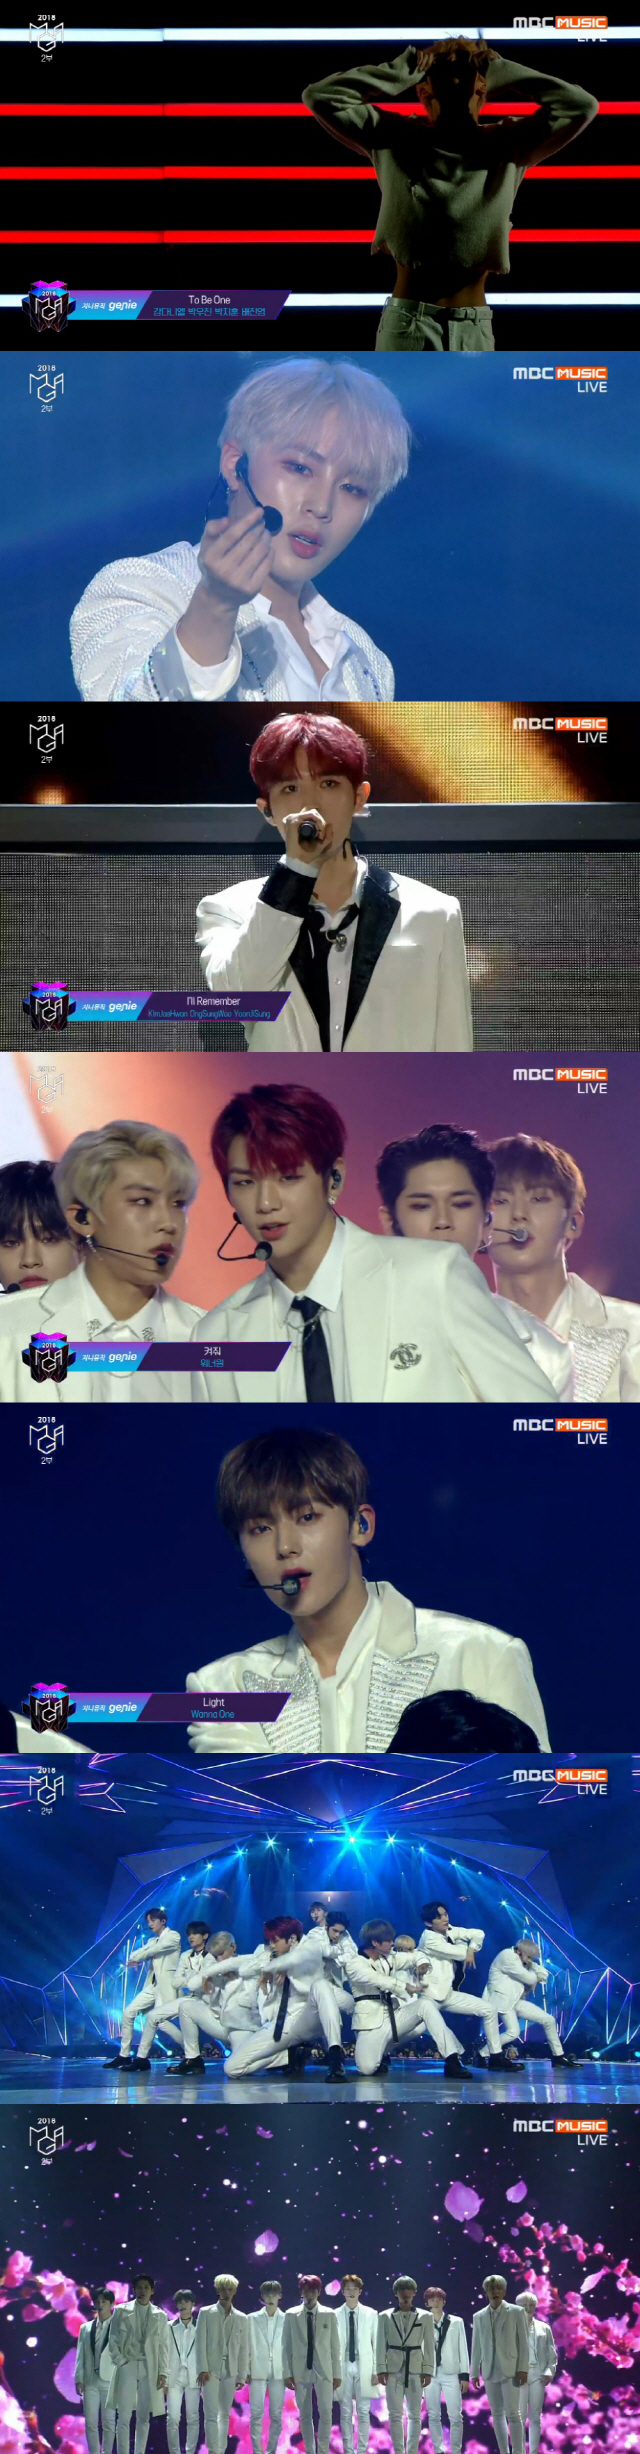 The 2018 MGA (MBC Plus X Genie Music Awards) Awards were held at Incheon Namdong Gymnasium at 7 p.m. on the 6th.On this day, Wanna One set up a unit stage that was not shown before, and gave fans a different set of Sights.The first to appear on stage were Kang Daniel, Park Woo-jin, Park Ji-hoon and Bae Jin-young, who showed off their powerful dance to To Be One.Lee Kwan-rin, Lee Dae-hui, Ha Sung-woon and Hwang Min-hyun then created a sophisticated performance with Nothing Without You.Kim Jae-hwan, Ong Sung-woo and Yoon Ji-sung enthusiastically sang Your Name, creating a faint sensibility.Wanna One, who finished the unit stage, moved to the central stage and showed Hold on and Beautiful in full.They caught the attention of fans with their intense energy and sexy coexistence.The 2018 MGA, the first Korean broadcaster and music platform companys Collaboration Awards, was attended by foreign artists such as BTS, Twice, Wanna One, Hayes, Cheongha, Momoland, Stray Kids, Vibe, Ben, Celeb Five, as well as Charlie Fuss, Generationsprom Eggs Giltive, and others. She shone.